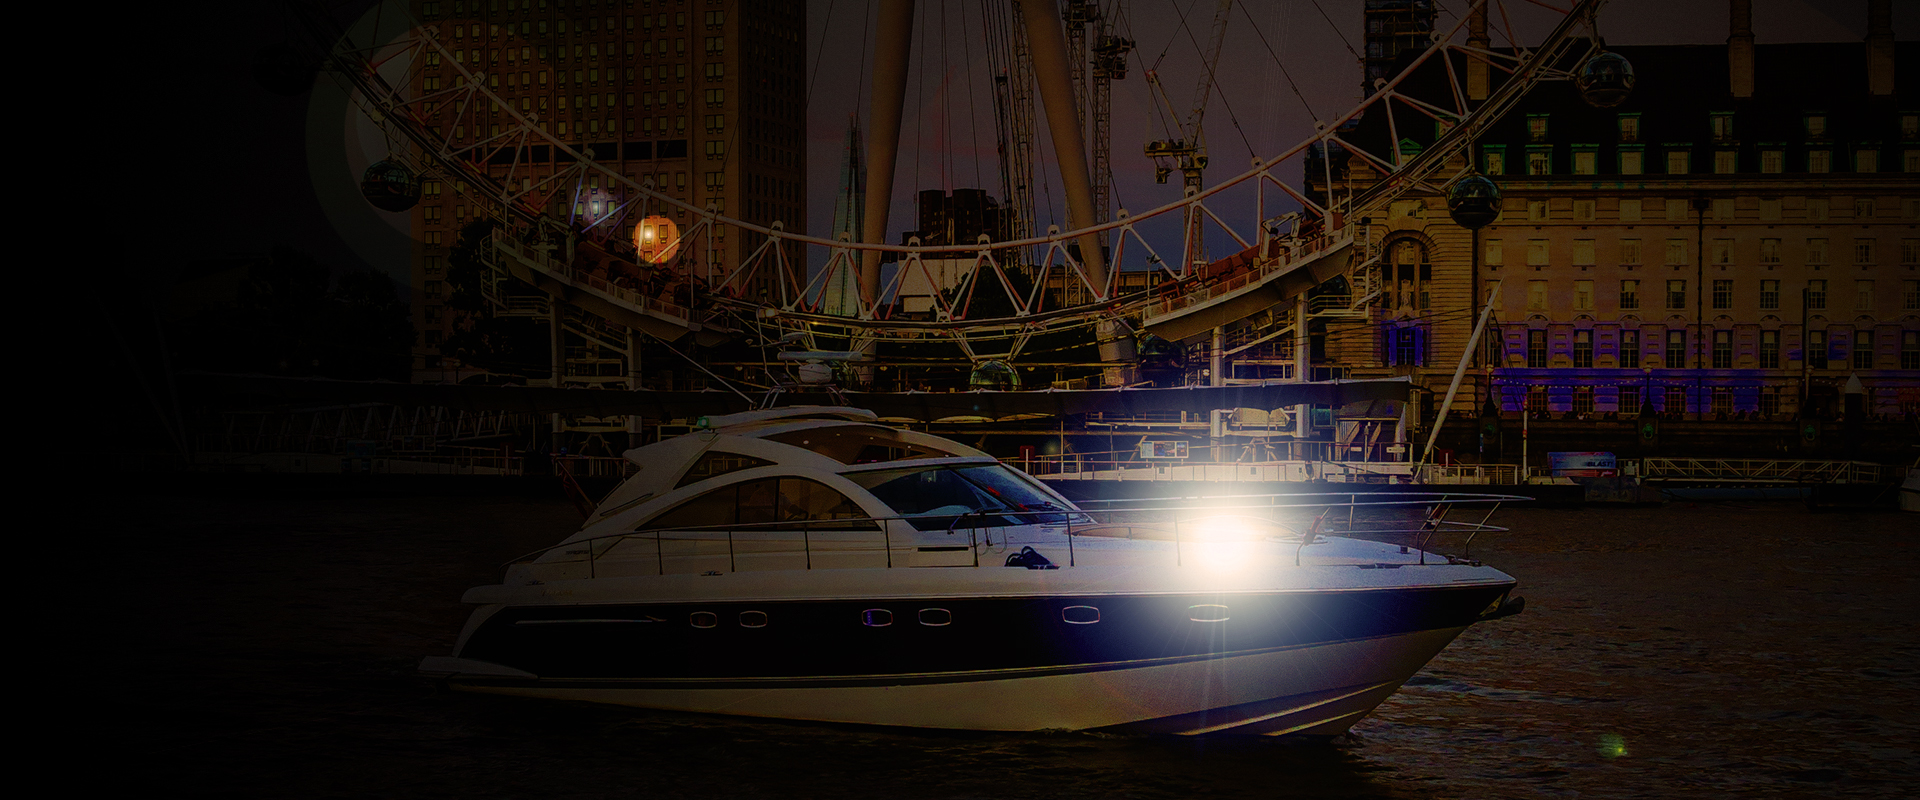 london yacht party hire